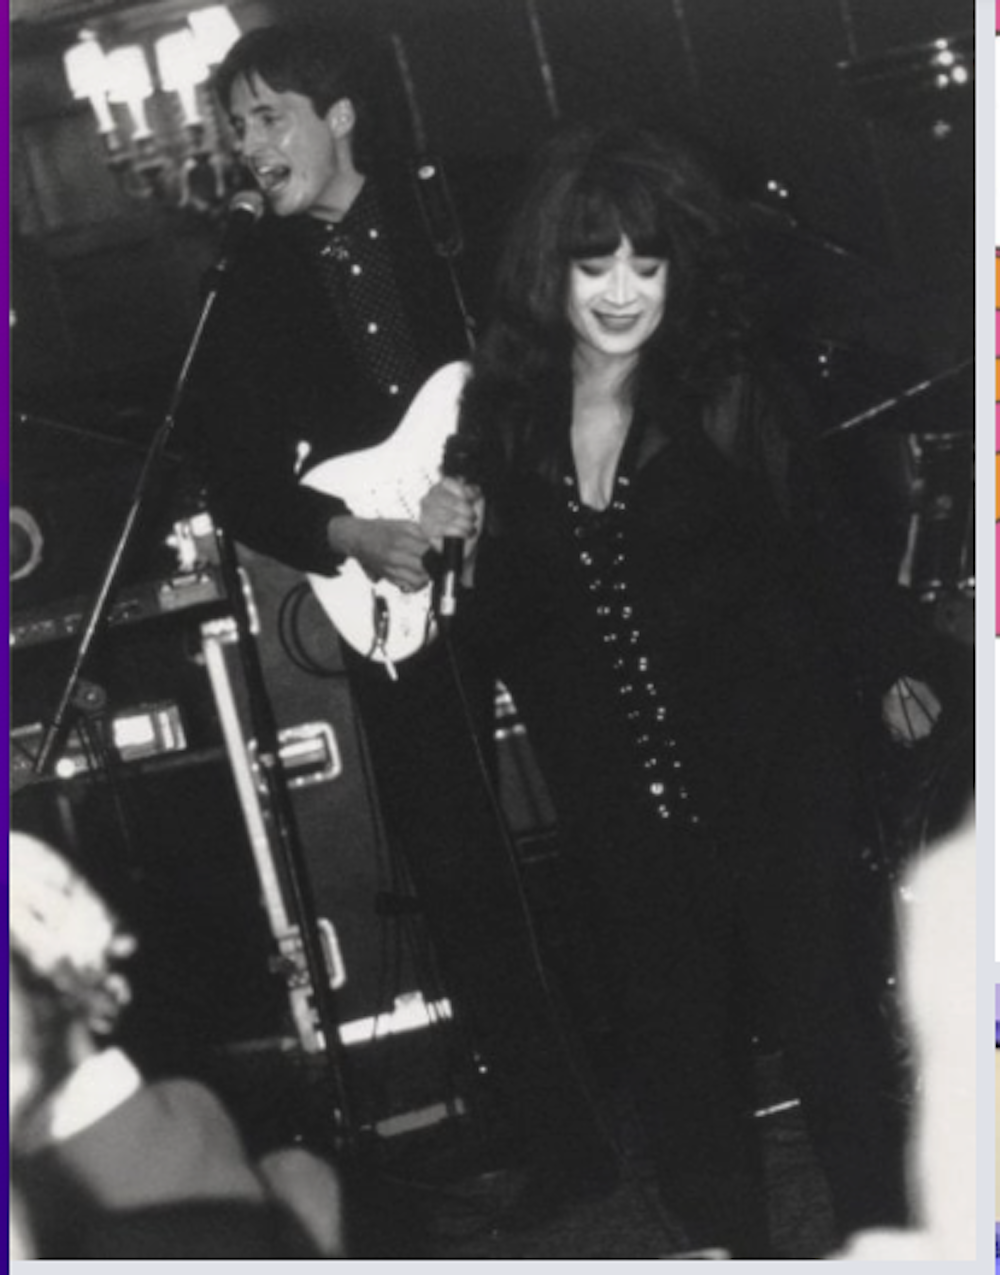 My Giggin with Ronnie Spector, by Tor Newcomer